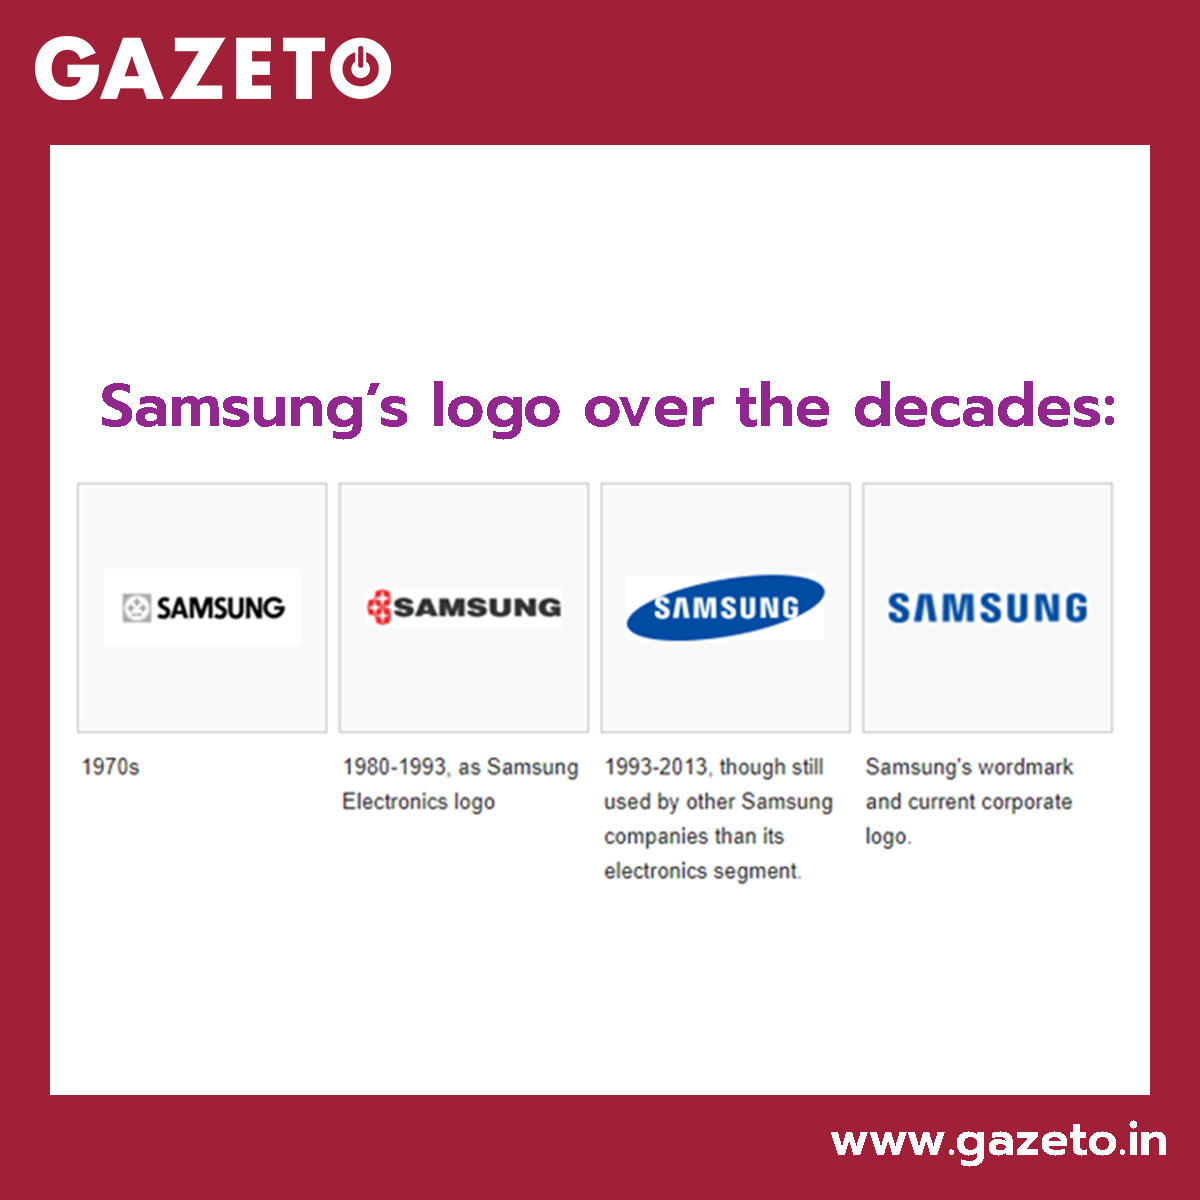 Name the largest mobile manufacturing company which launched its first mobile phone way back in 1988?

Ref: statista.com/chart/19854/co…

#Gazeto #UpgradingTheExperience #Pune #mobile #Samsung #brandstory #brand #manufacturer #history #logo #brandhistory #knowledge